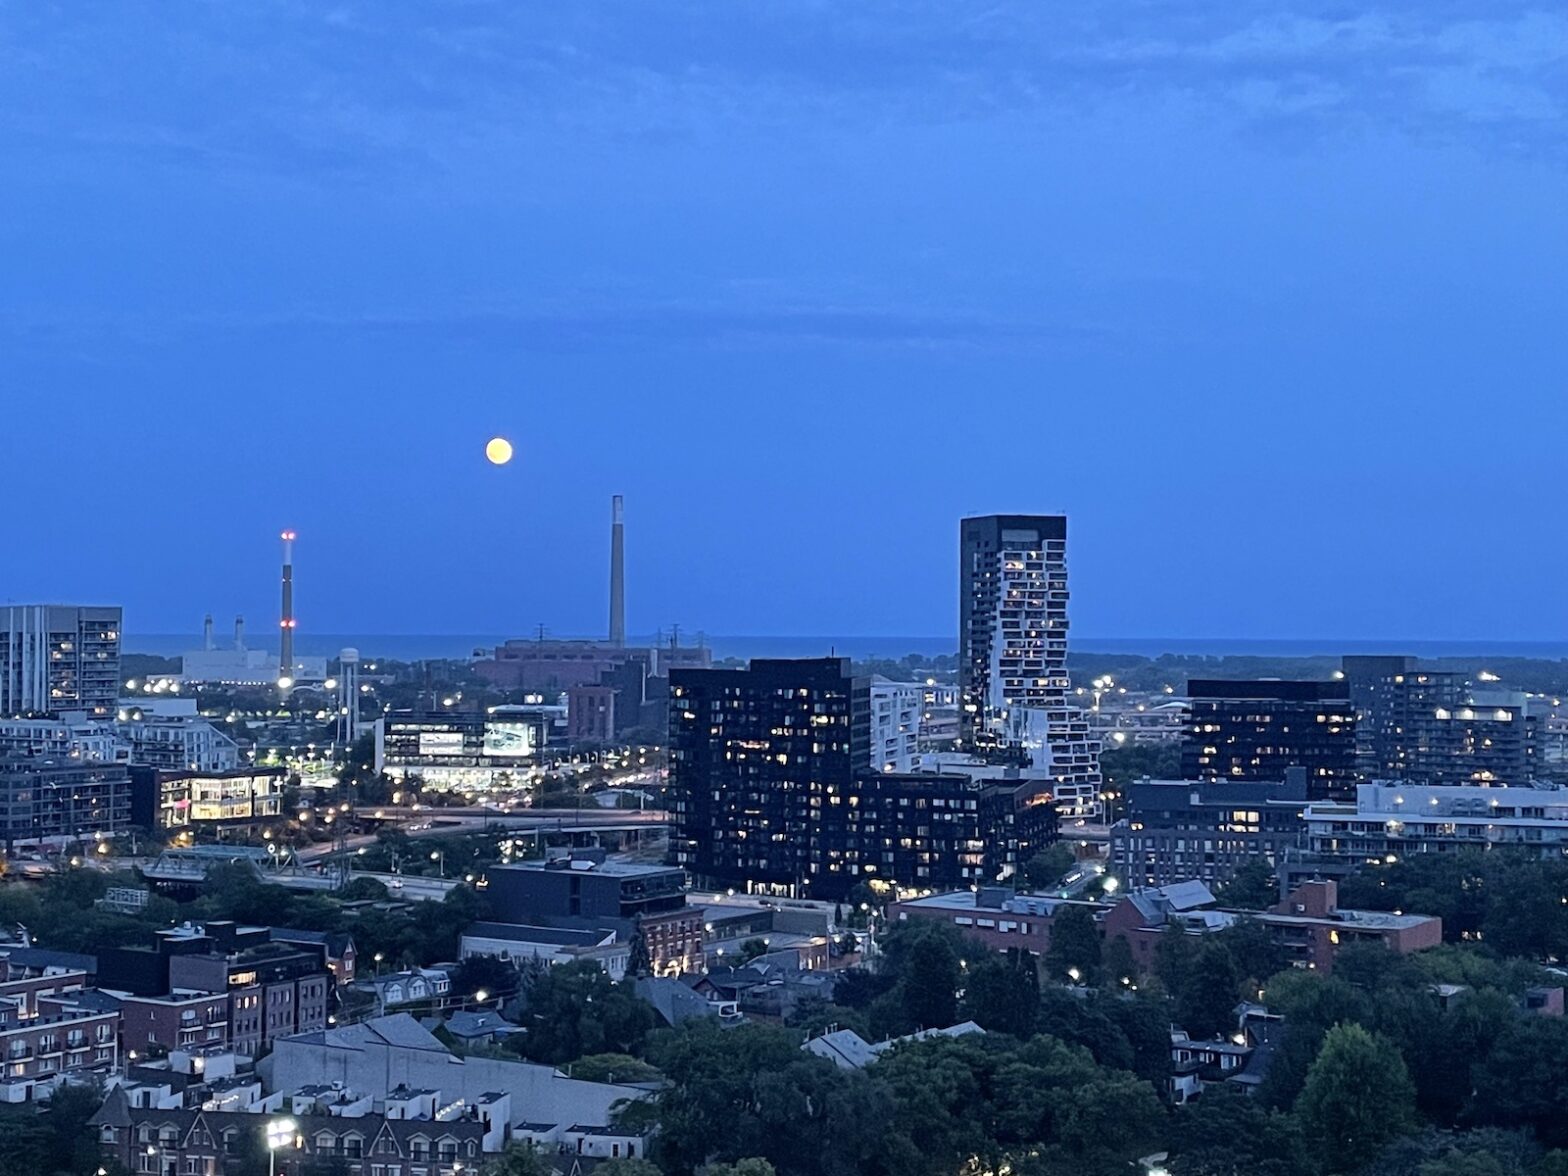 The rising moon over Corktown Common in Toronto. A deep blue sky over an evening cityscape.